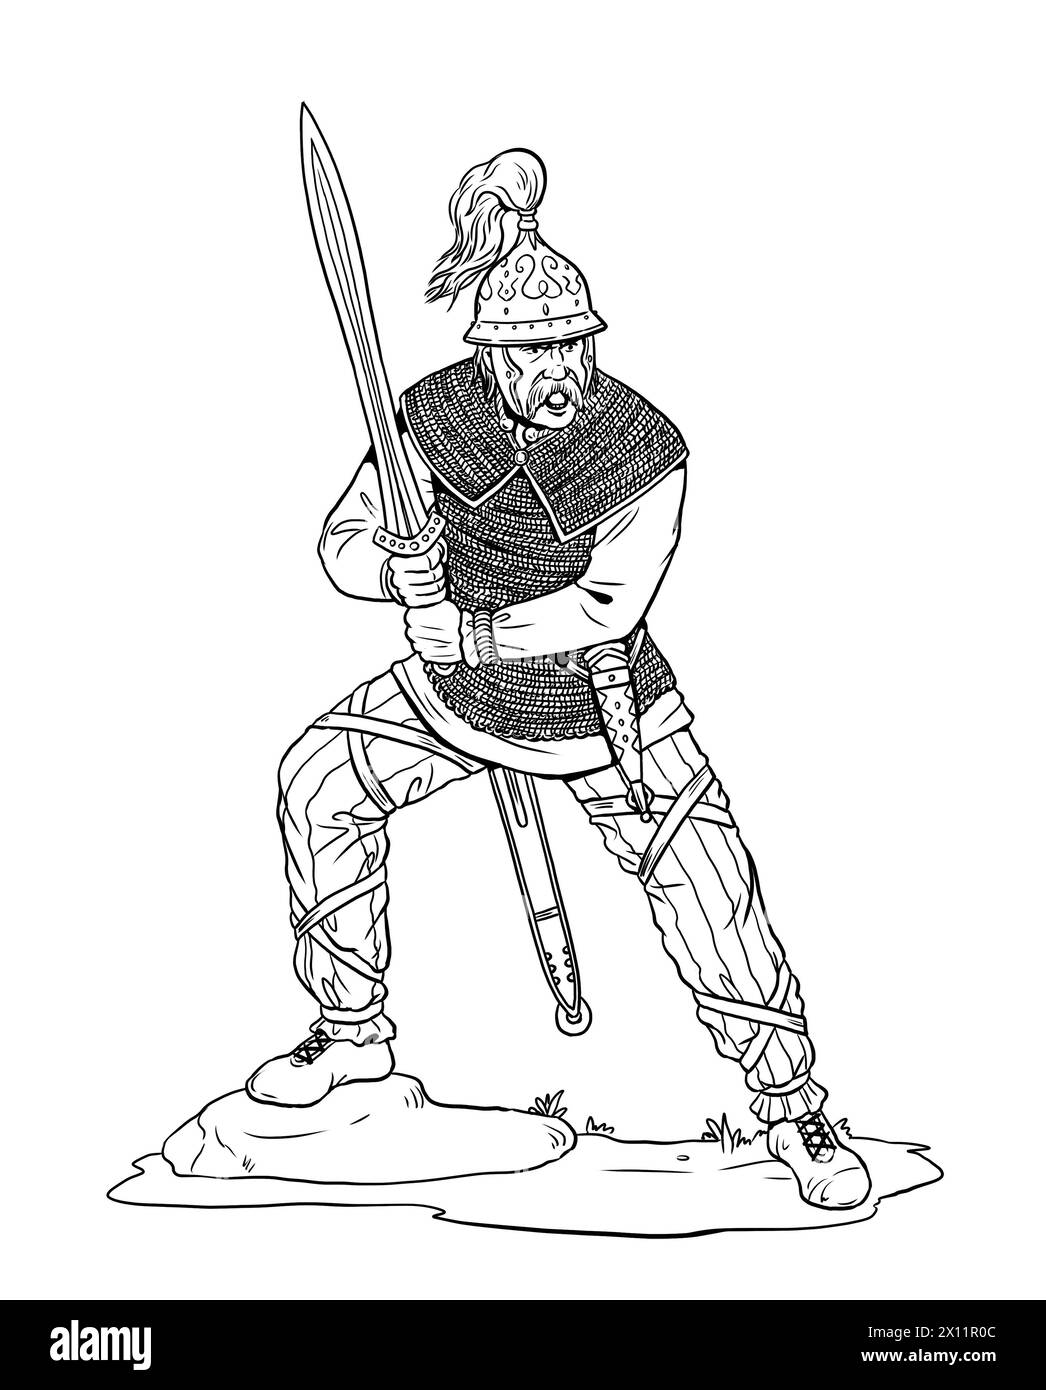 Gallic Warrior on the attack. Drawing with Roman enemies - barbarians. Stock Photo